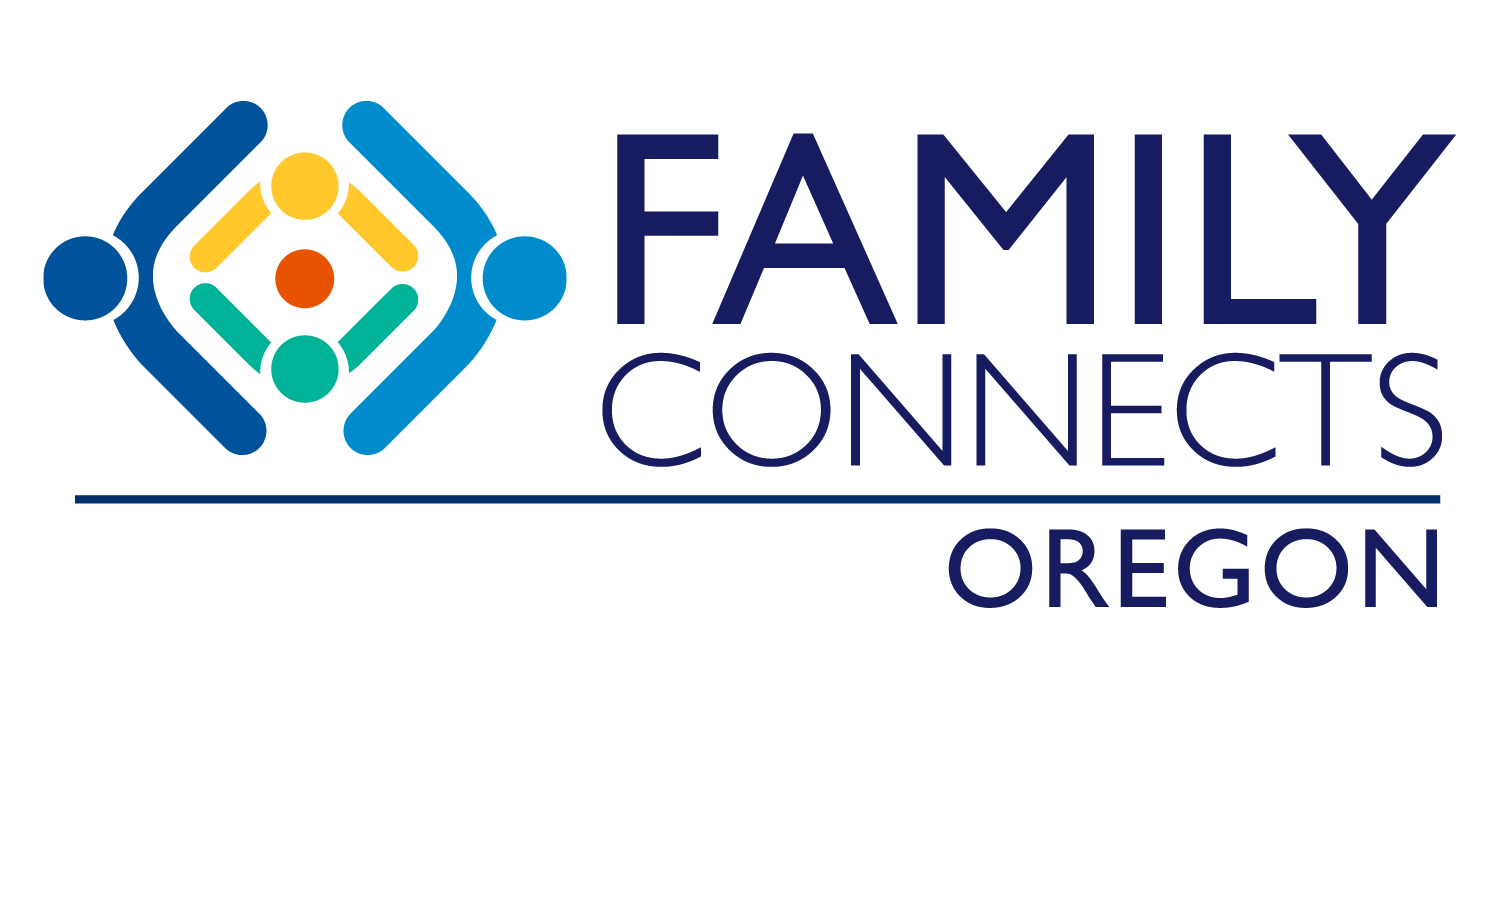 Family Connects Oregon